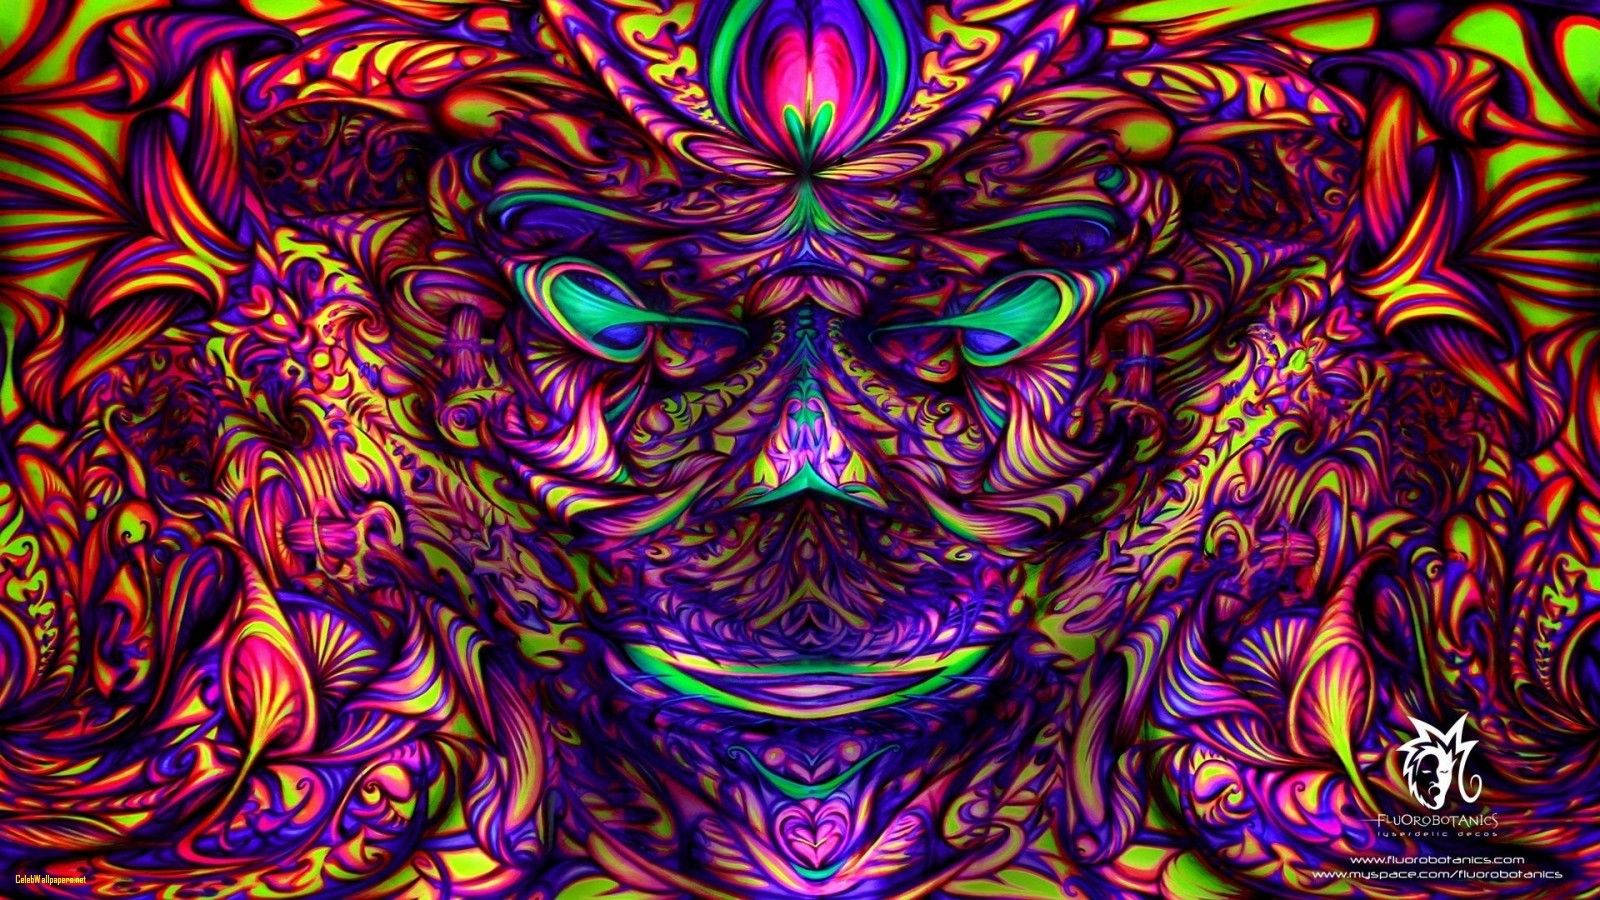 A symmetrical psychedelic art wallpaper of human face.